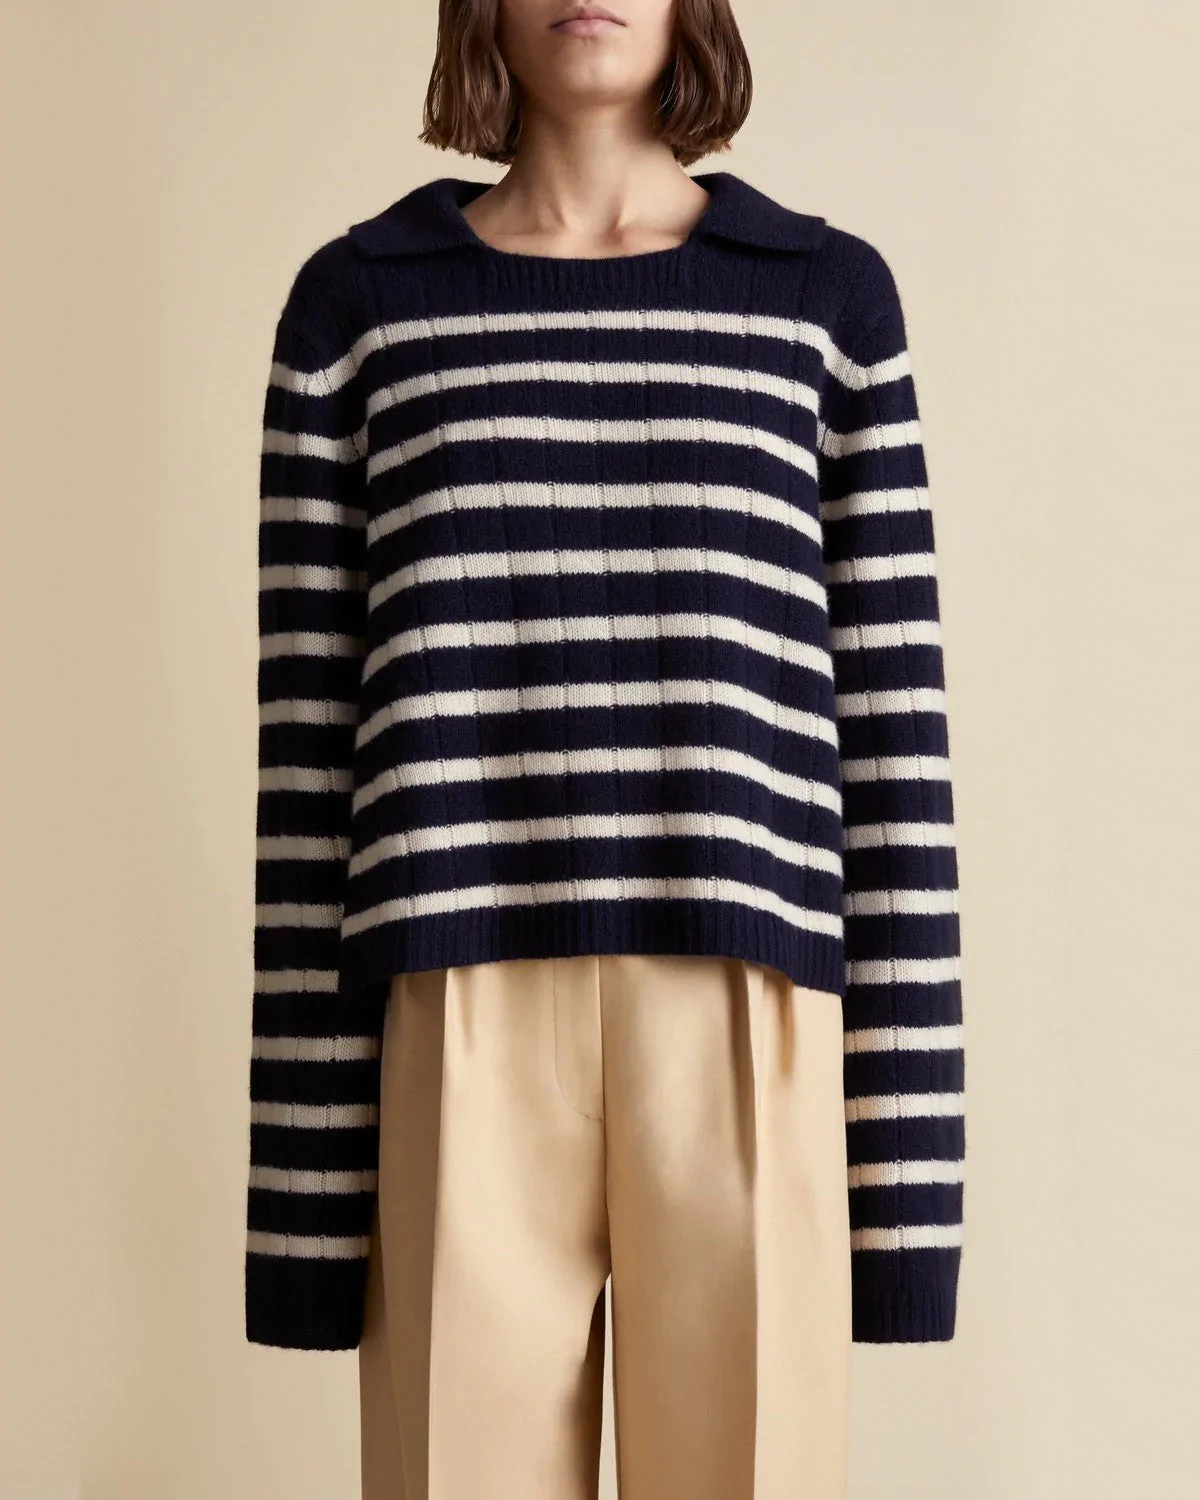 Khaite Navy and Butter Mateo Striped Cashmere Polo Sweater